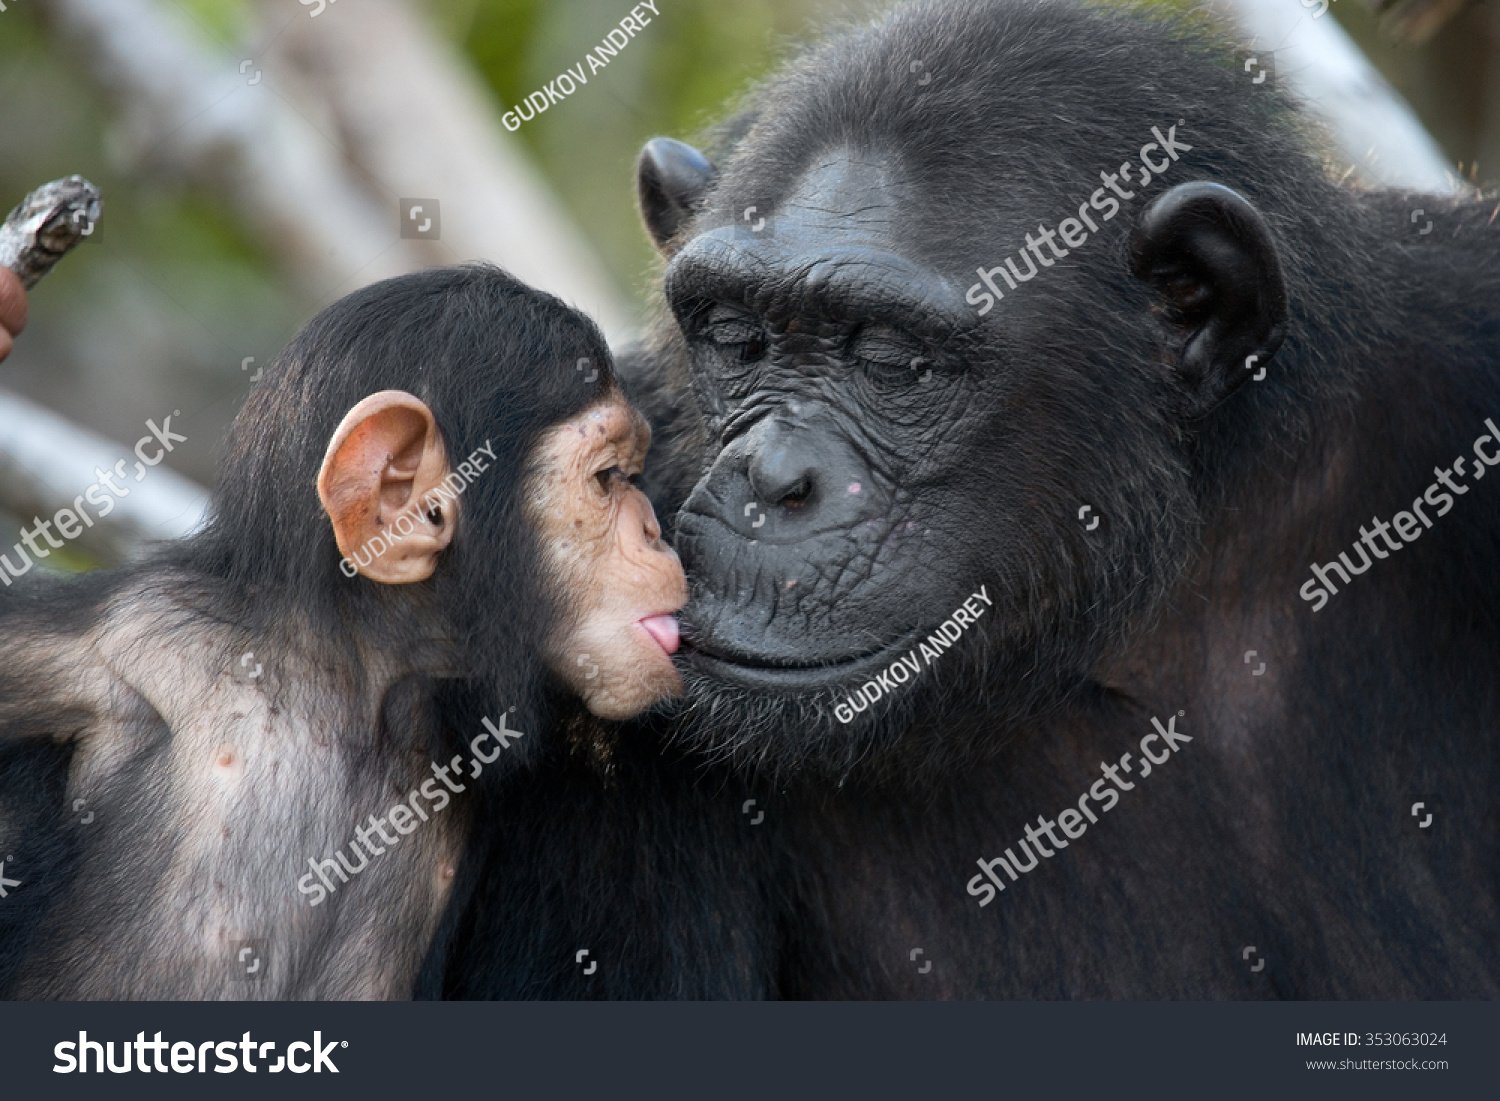 A female chimpanzee with a baby on mangrove trees. Republic of the Congo. Conkouati-Douli Reserve. An excellent illustration. #353063024